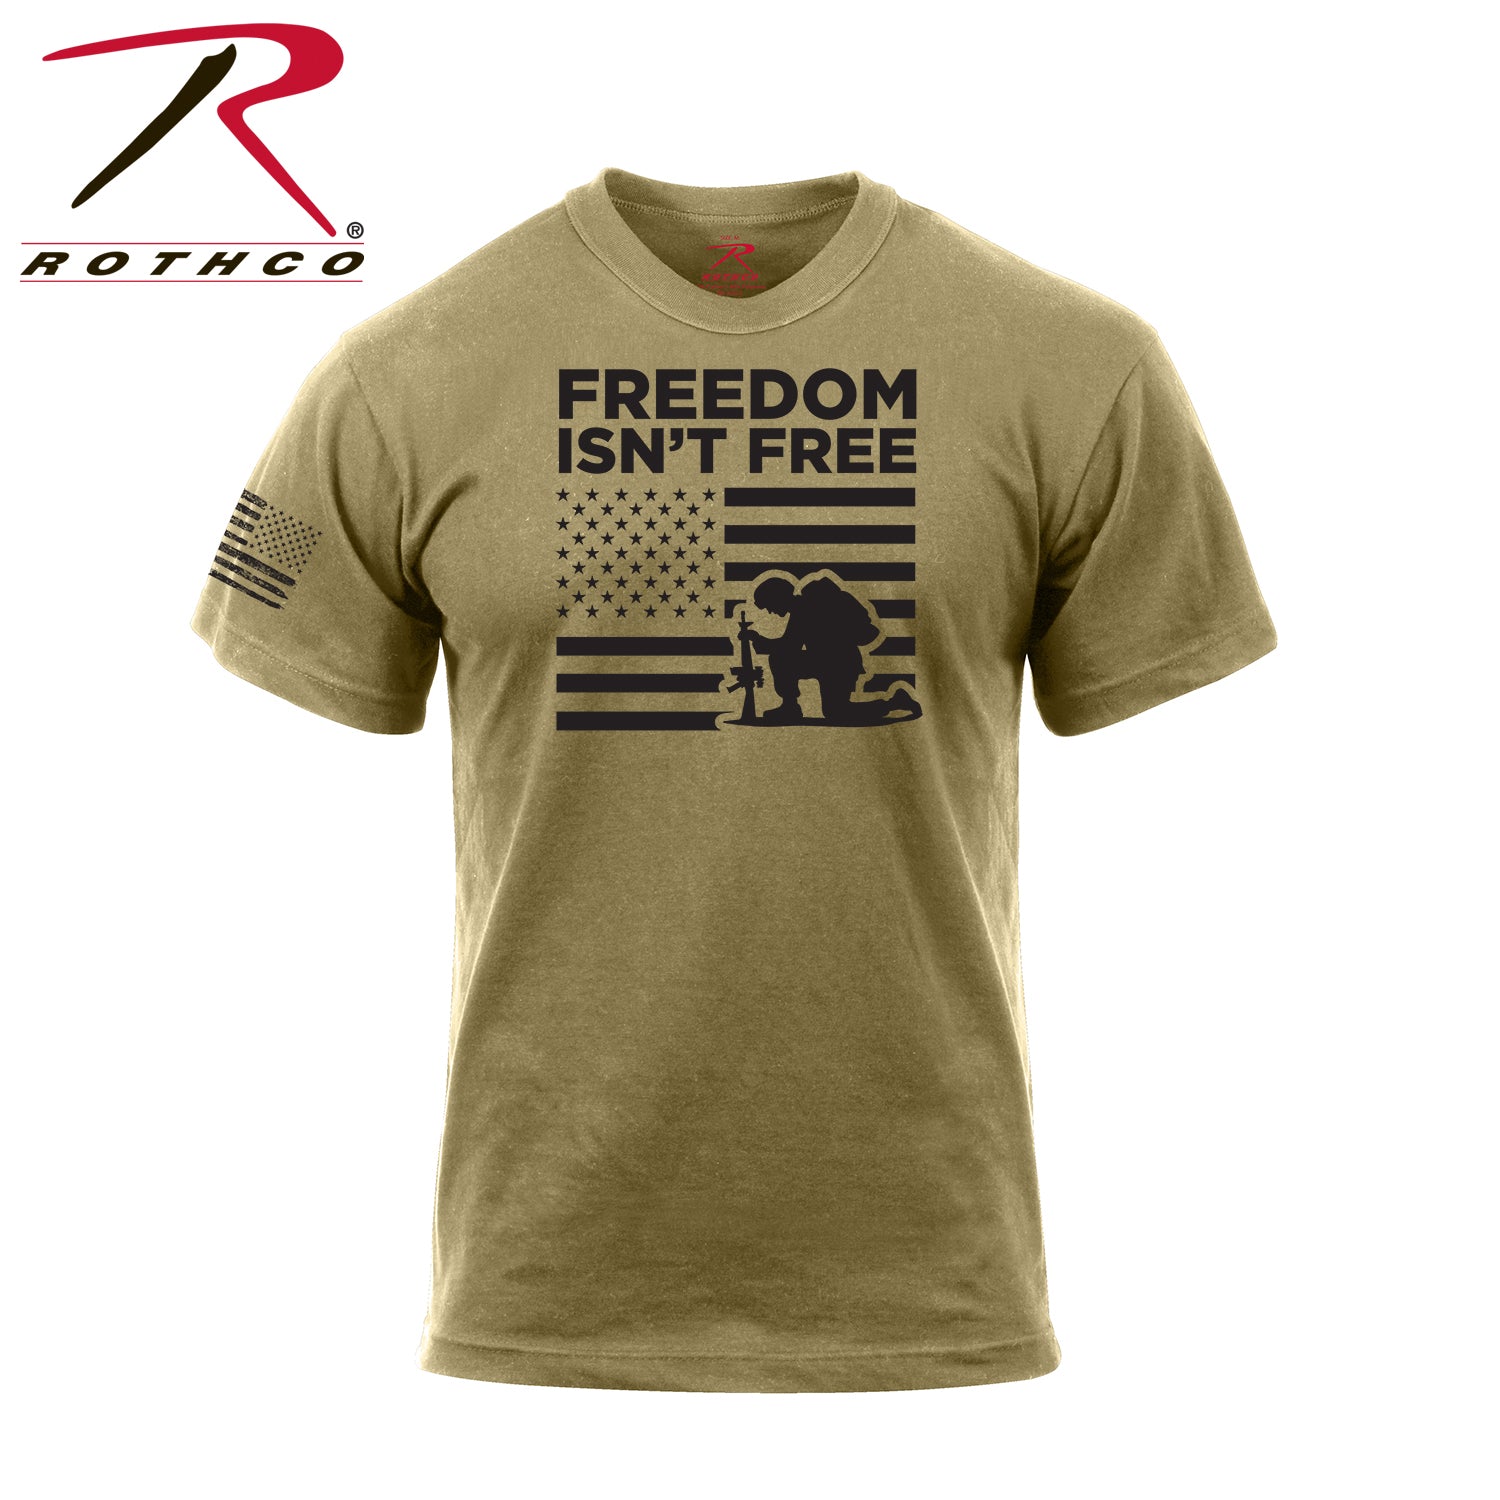 Rothco "Freedom Isn't Free" T-Shirt - Tactical Choice Plus